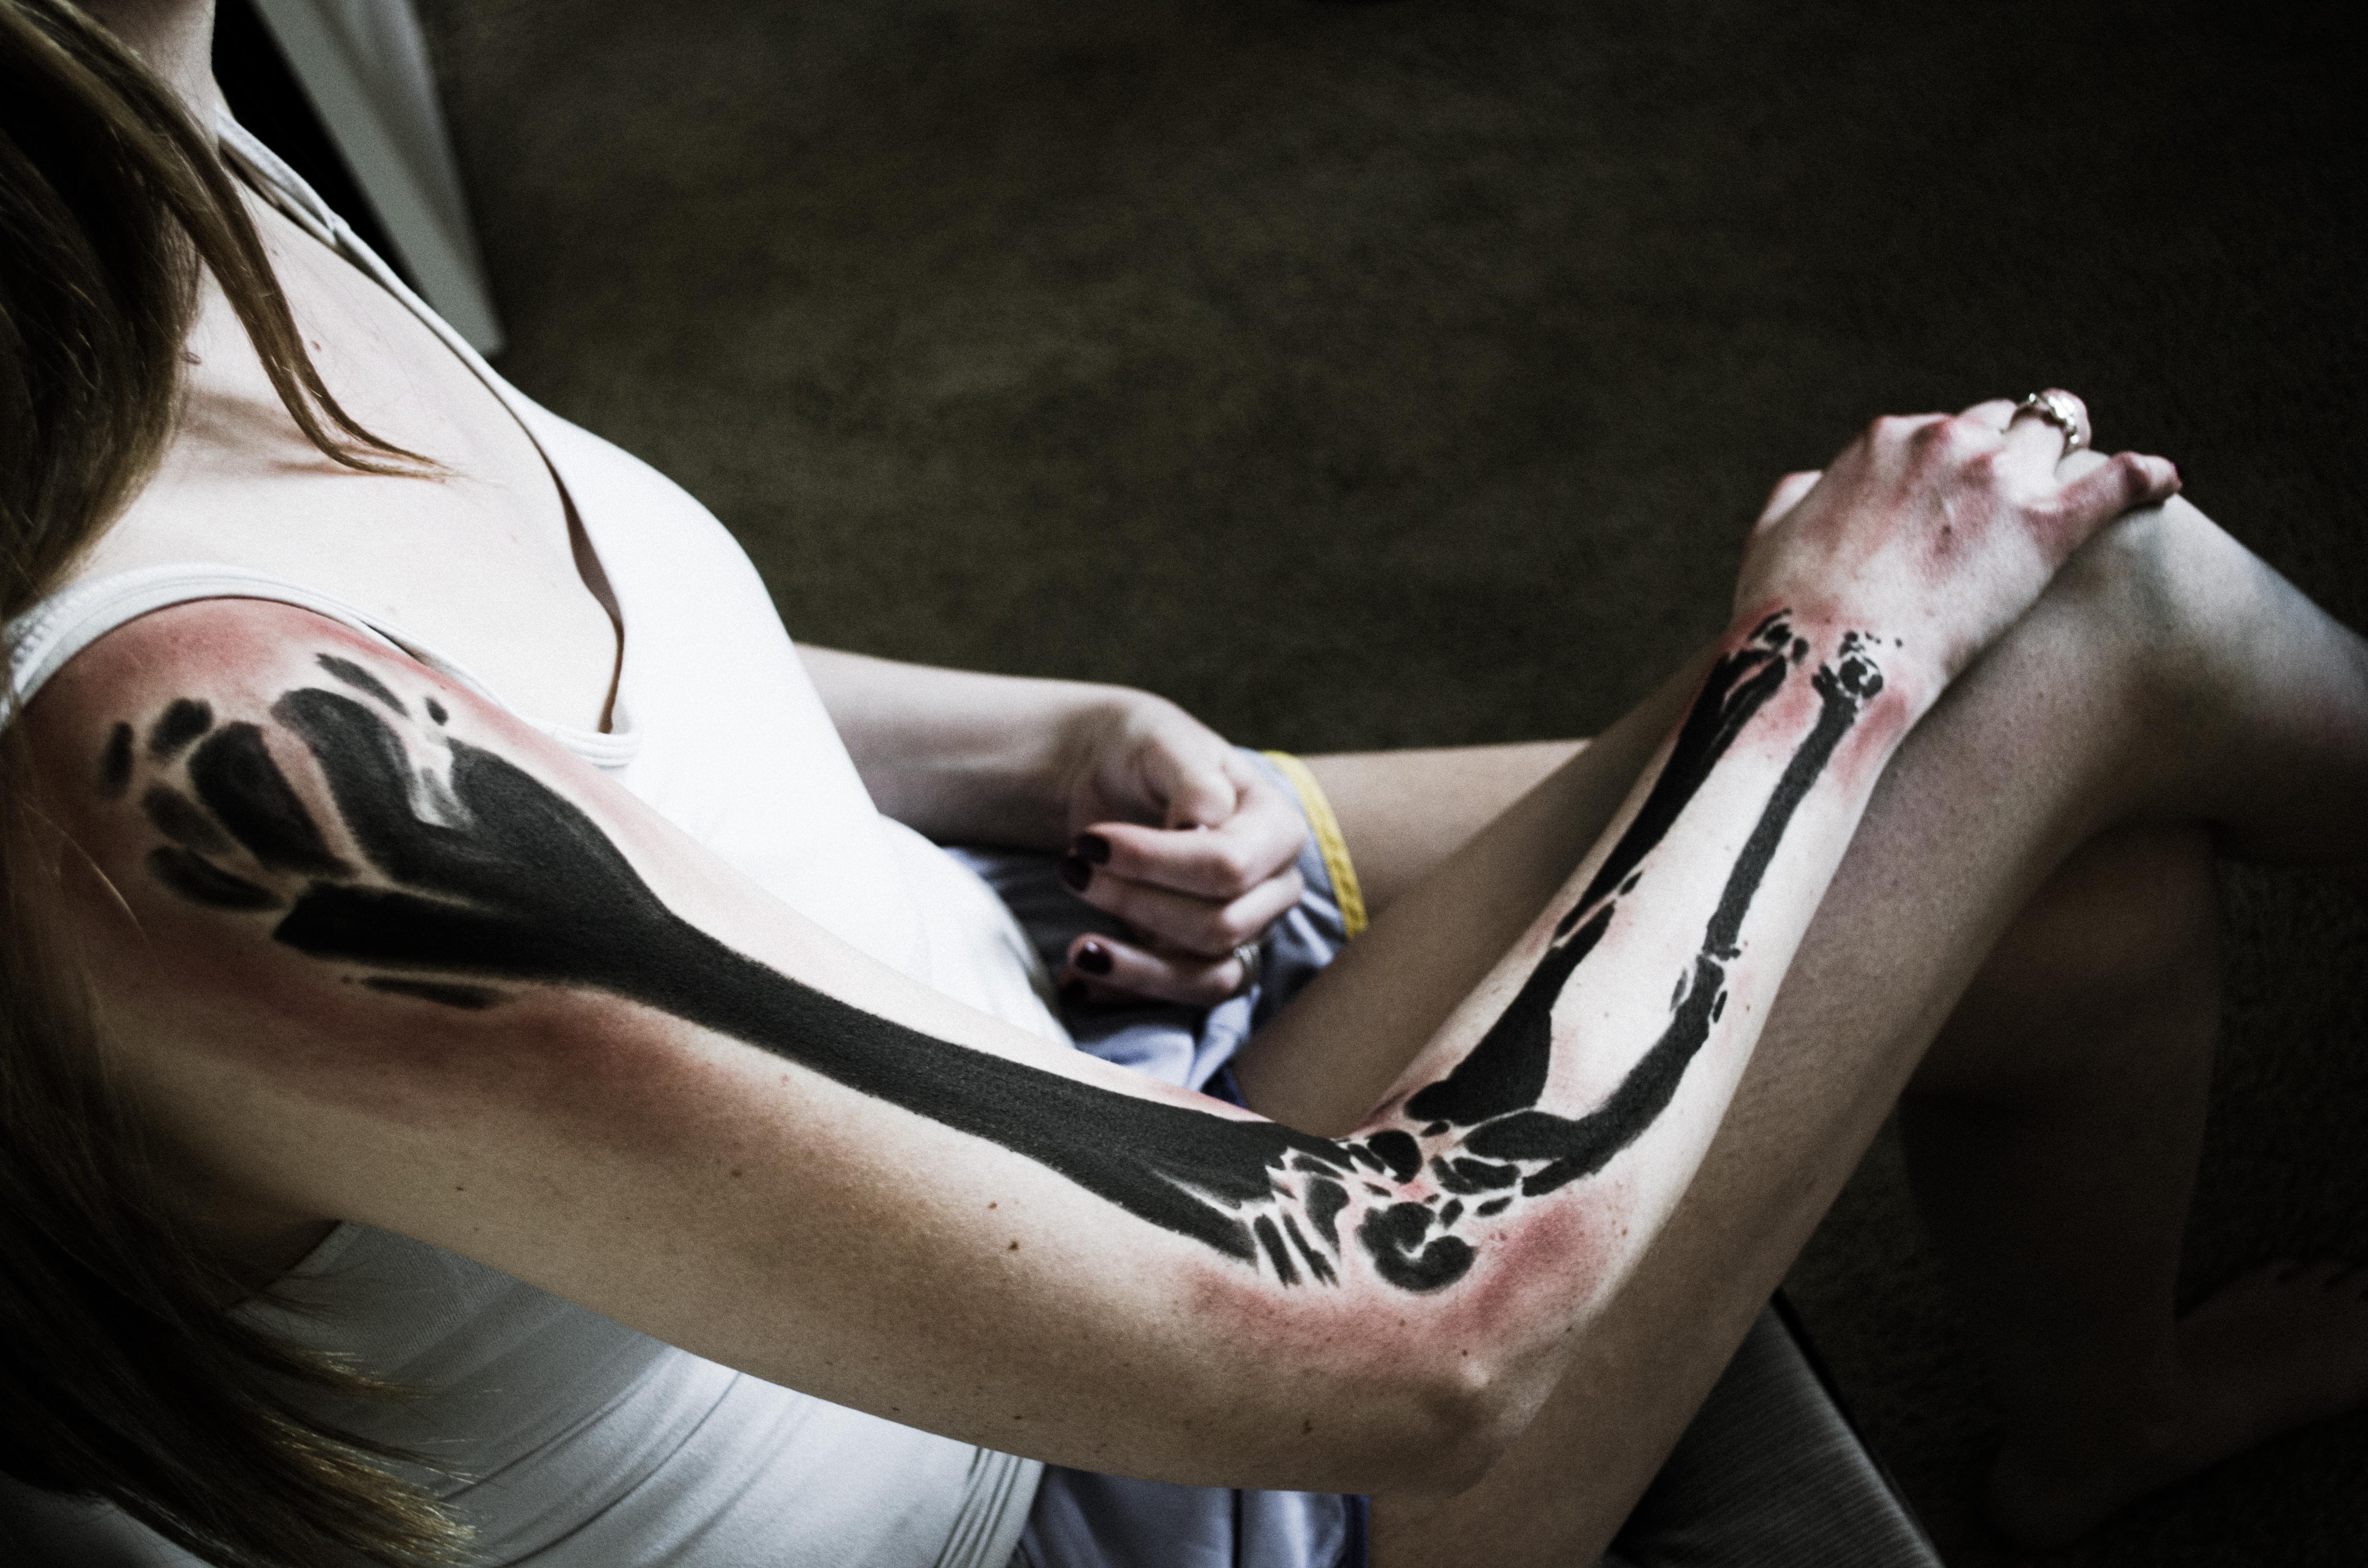 Arm makeup illustrating bone and joint pain.